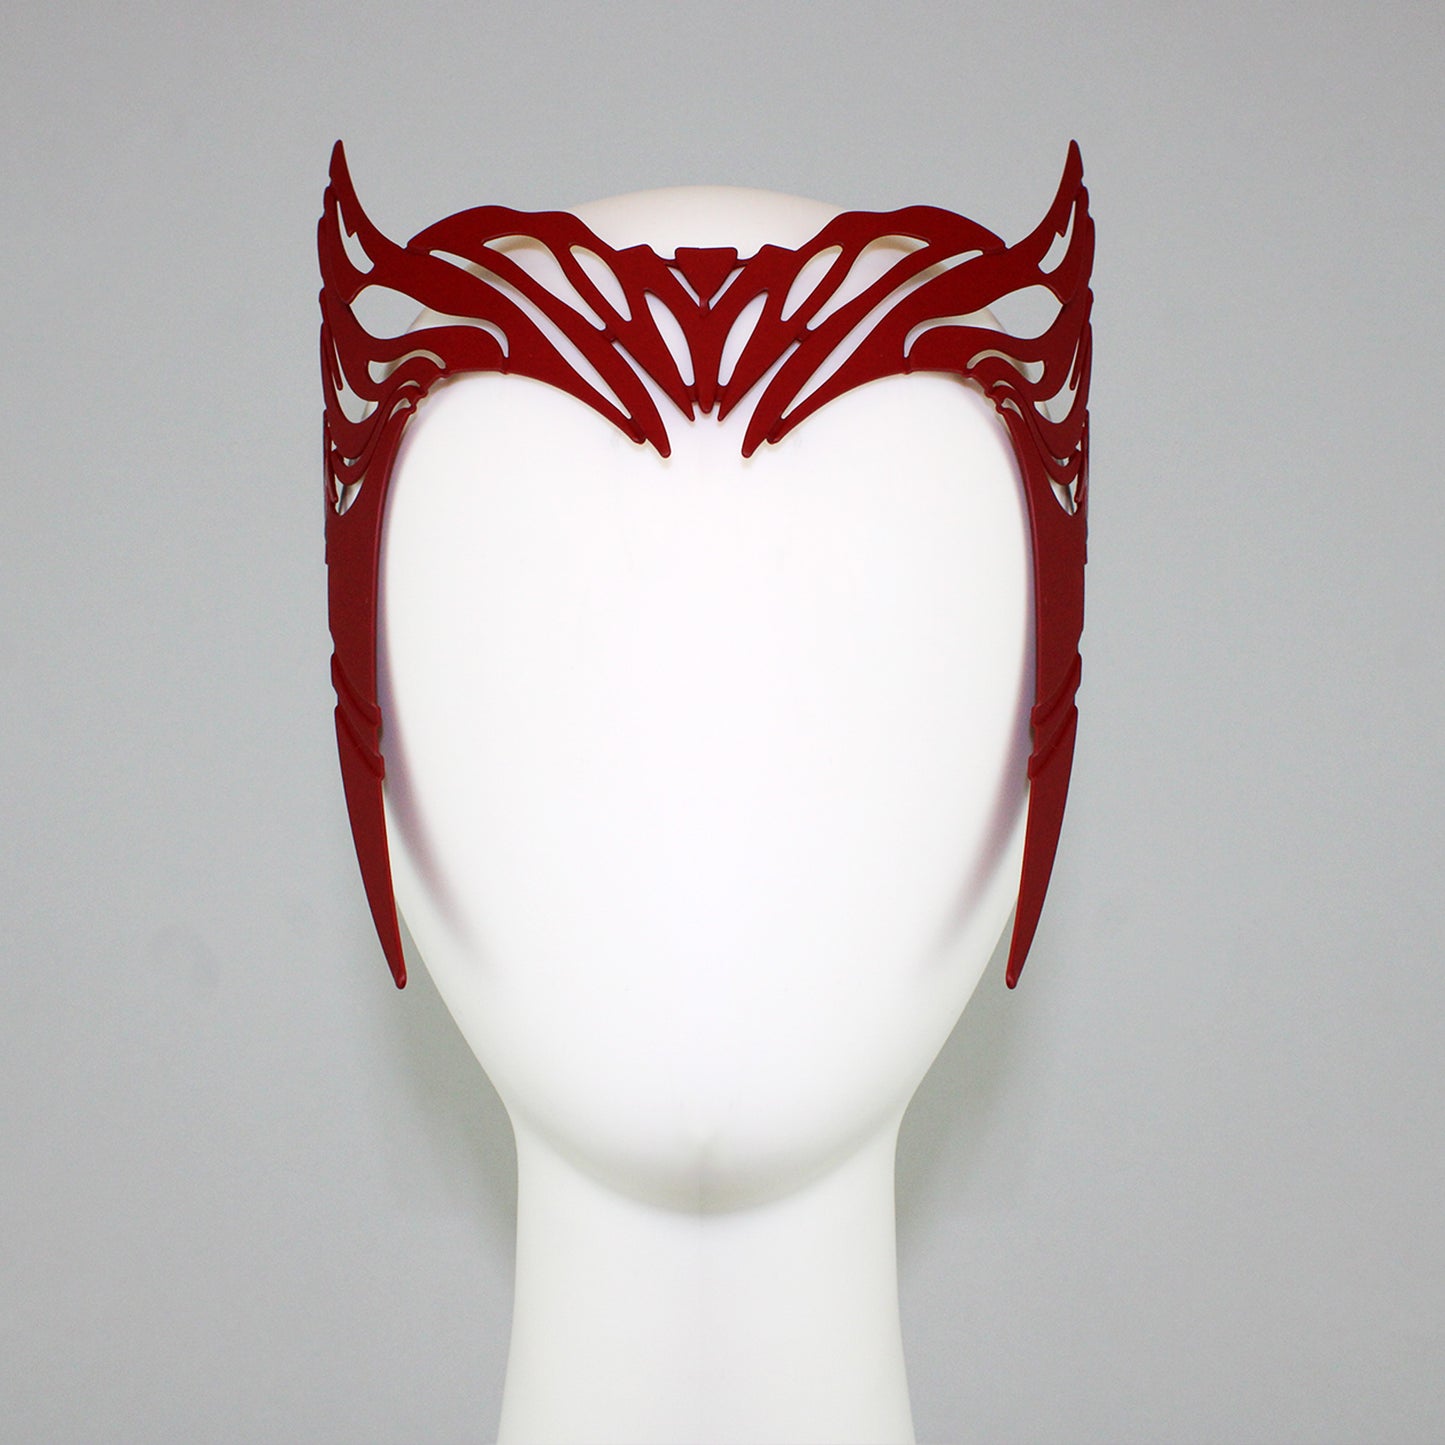 Load image into Gallery viewer, WandaVision Scarlet Witch Tiara (Marvel) Metal Prop Replica Headband
